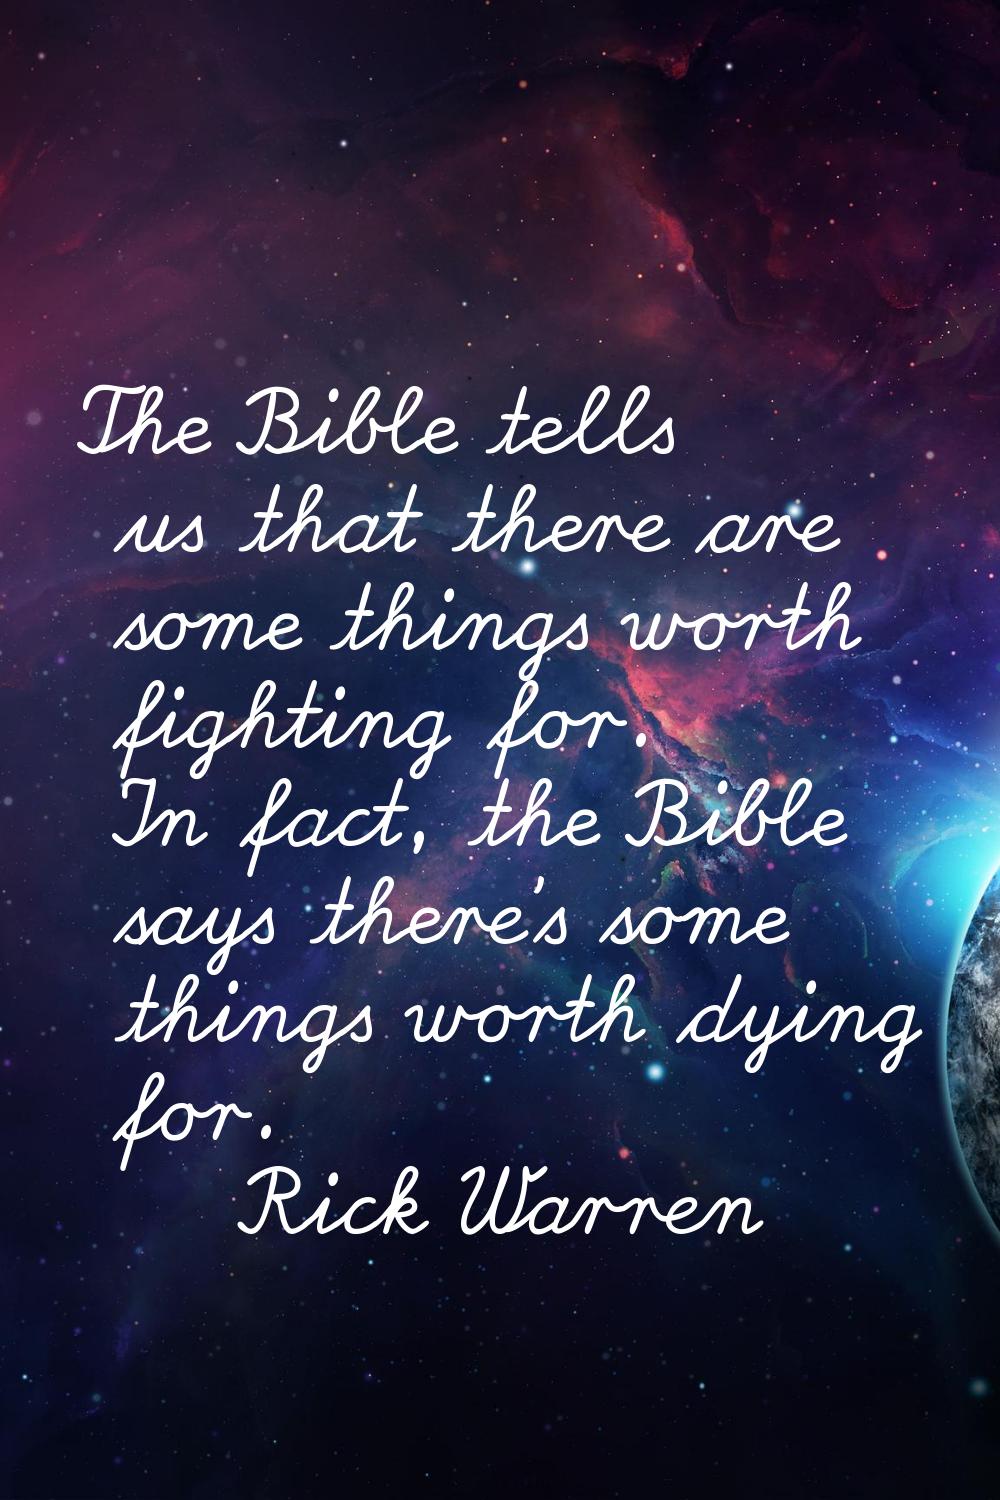 The Bible tells us that there are some things worth fighting for. In fact, the Bible says there's s